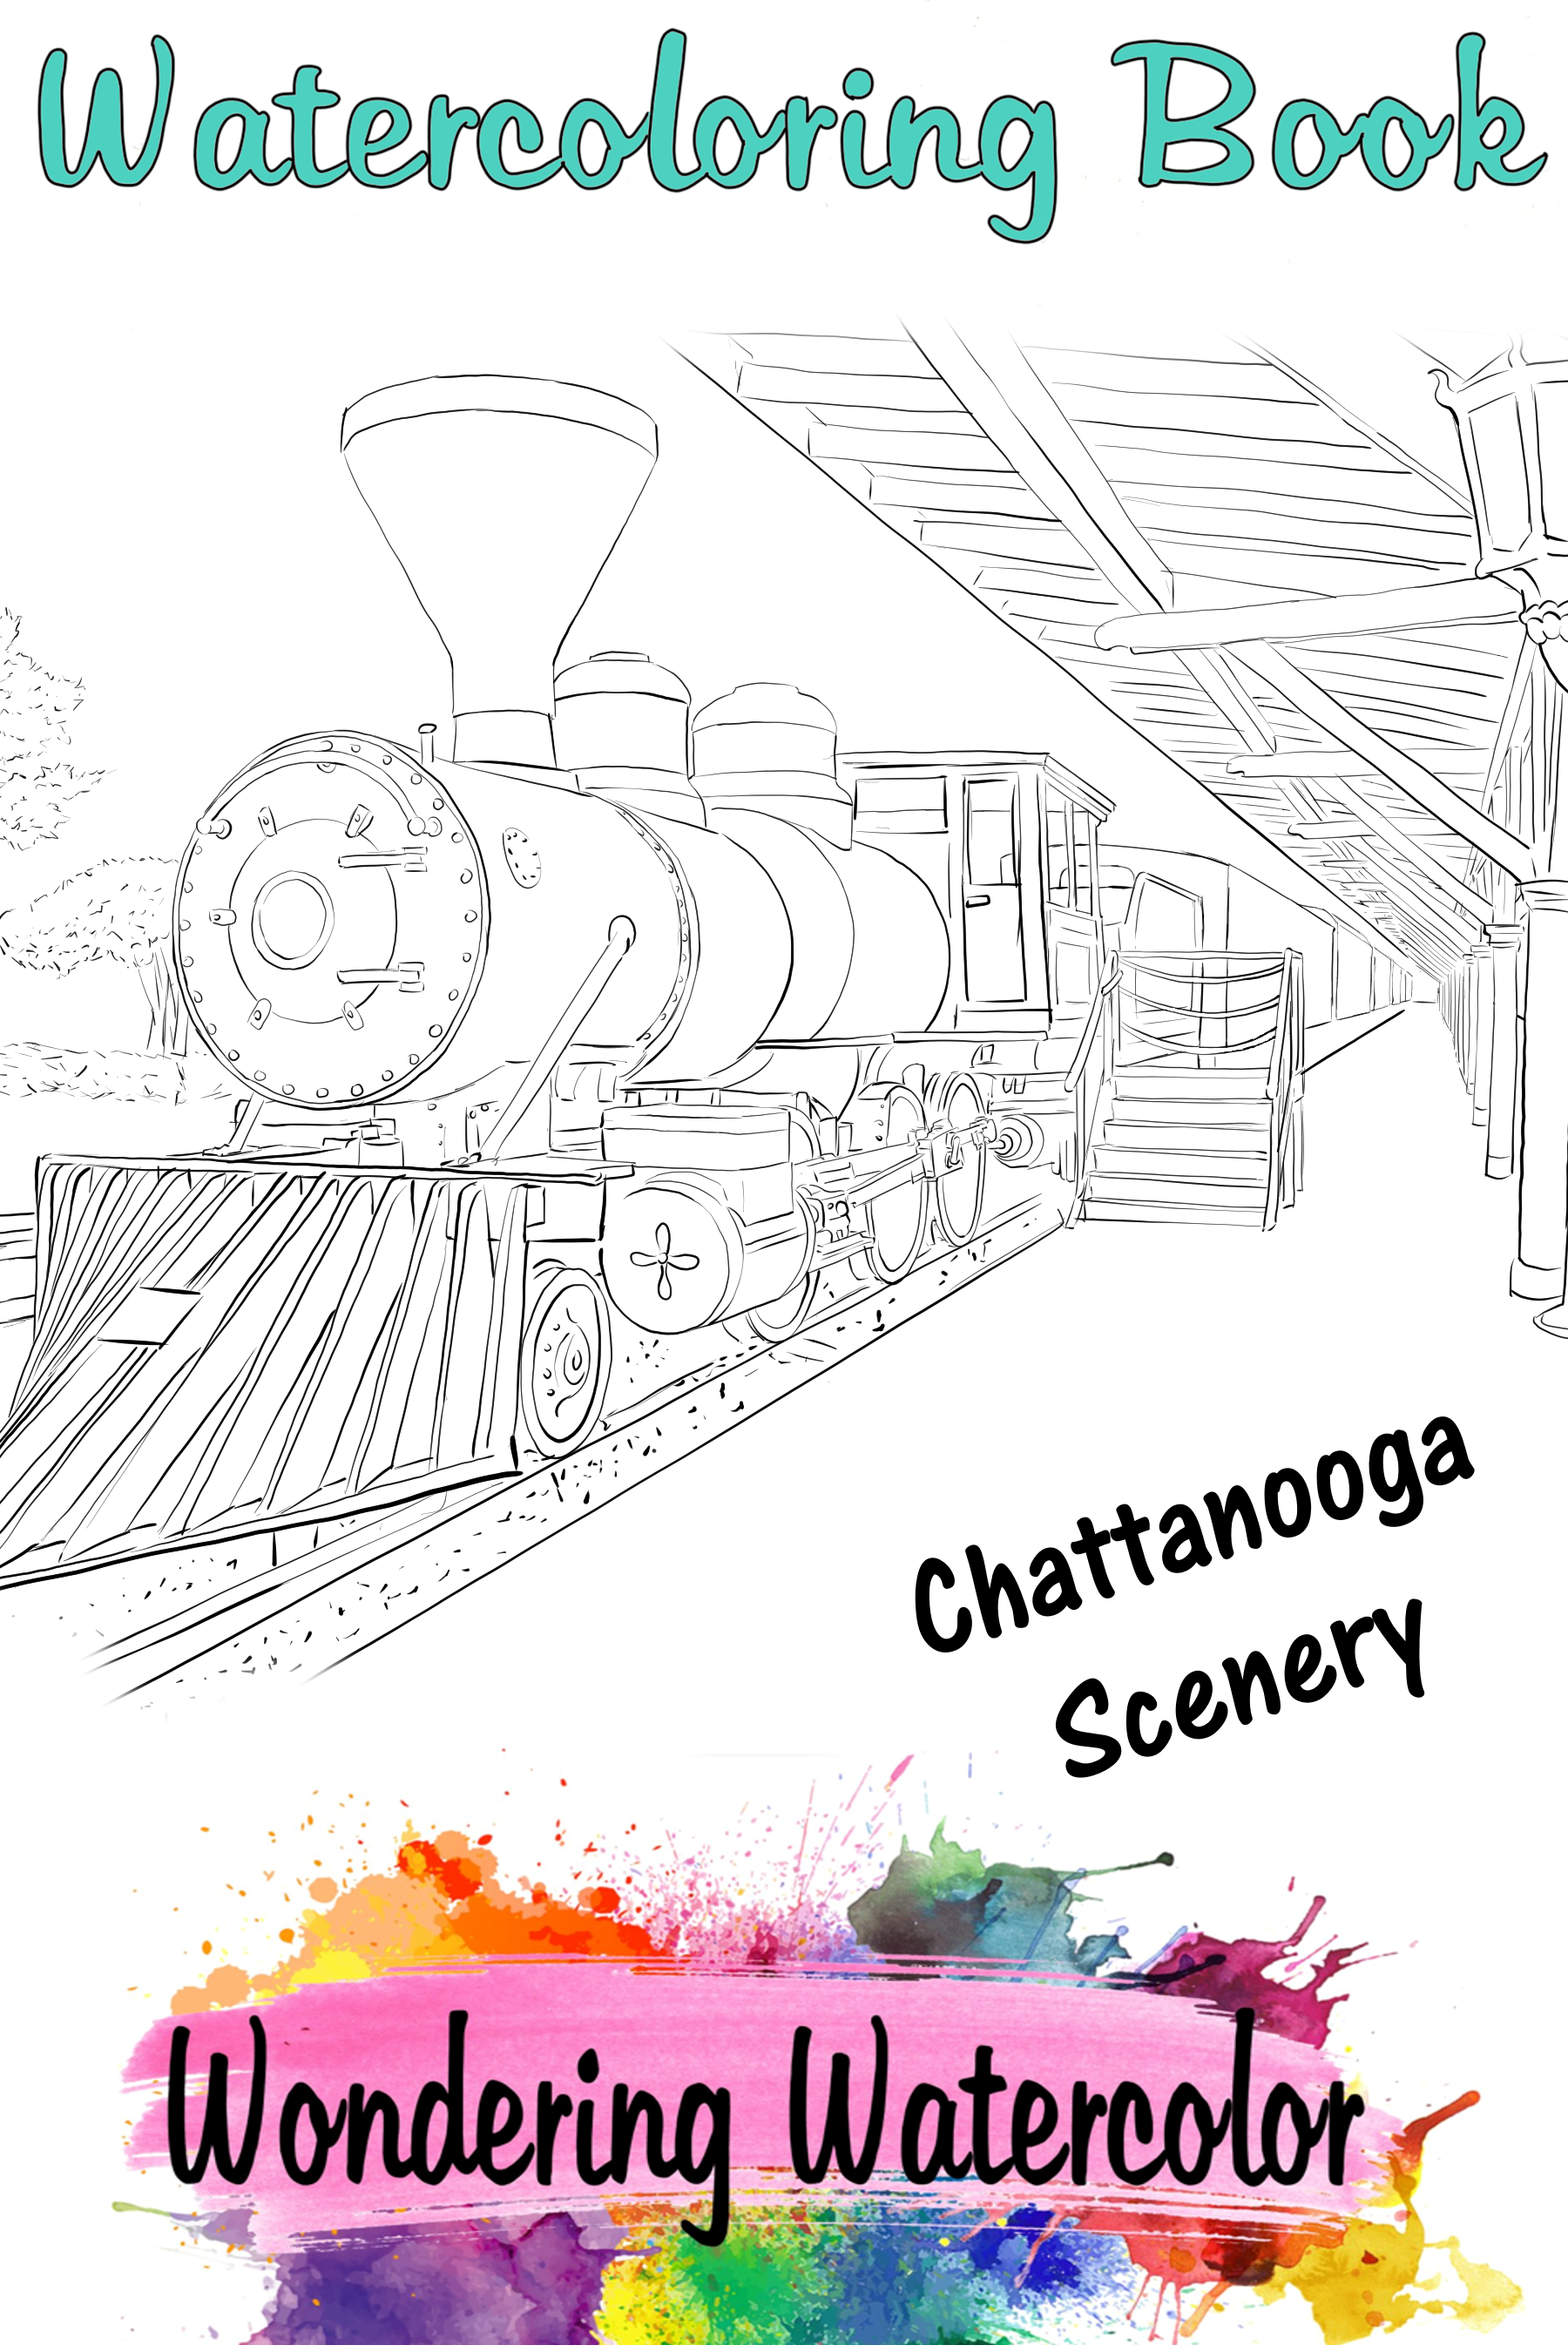 watercolor coloring book with theme of Chattanooga scenery cover page